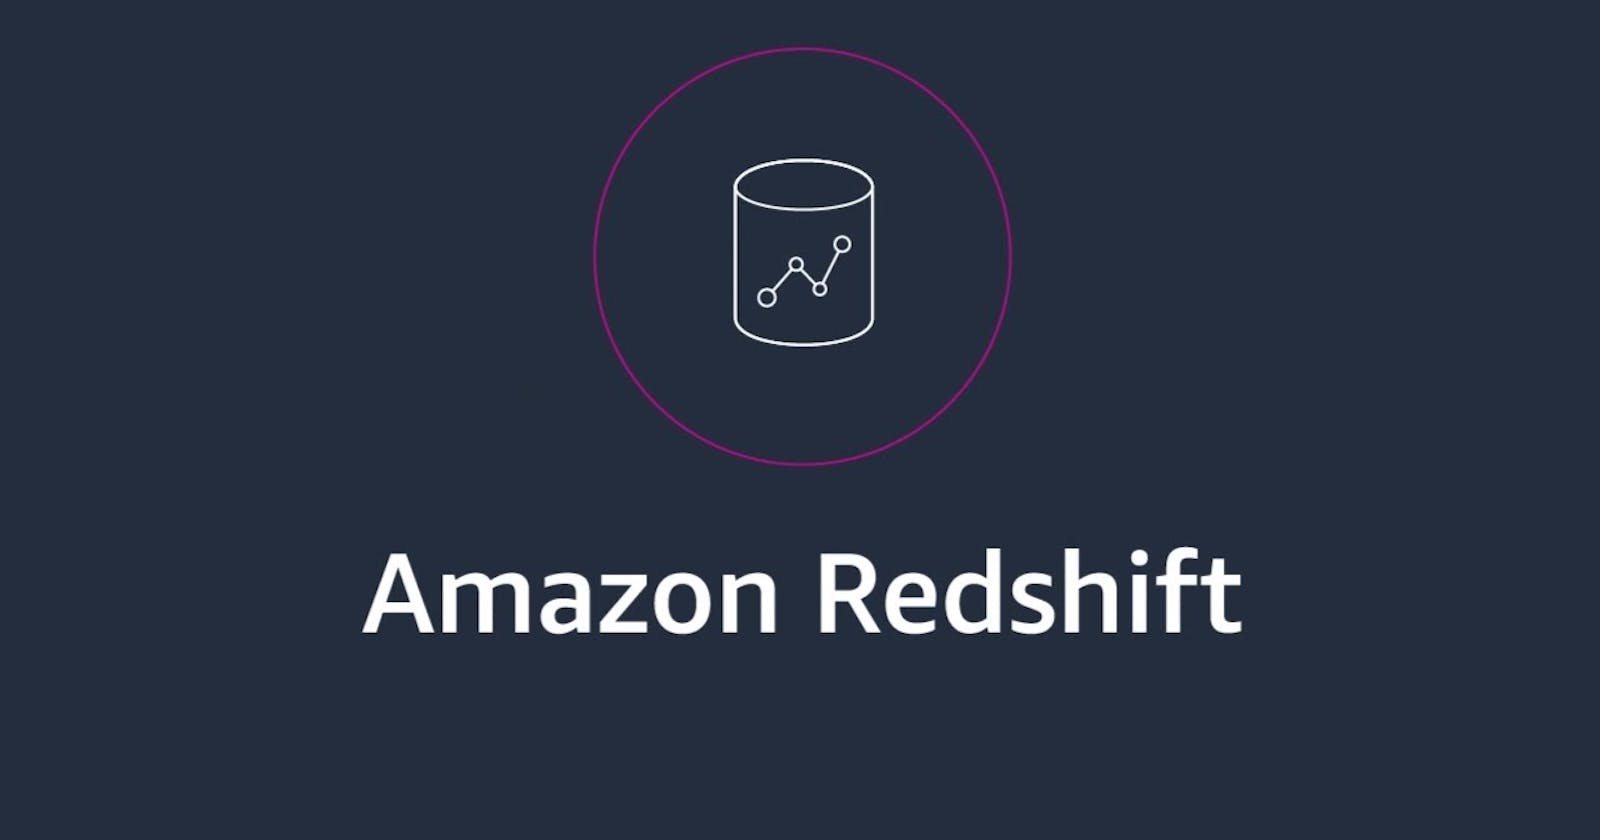 Managing Redshift Data: Unloading and Restoring with Ease